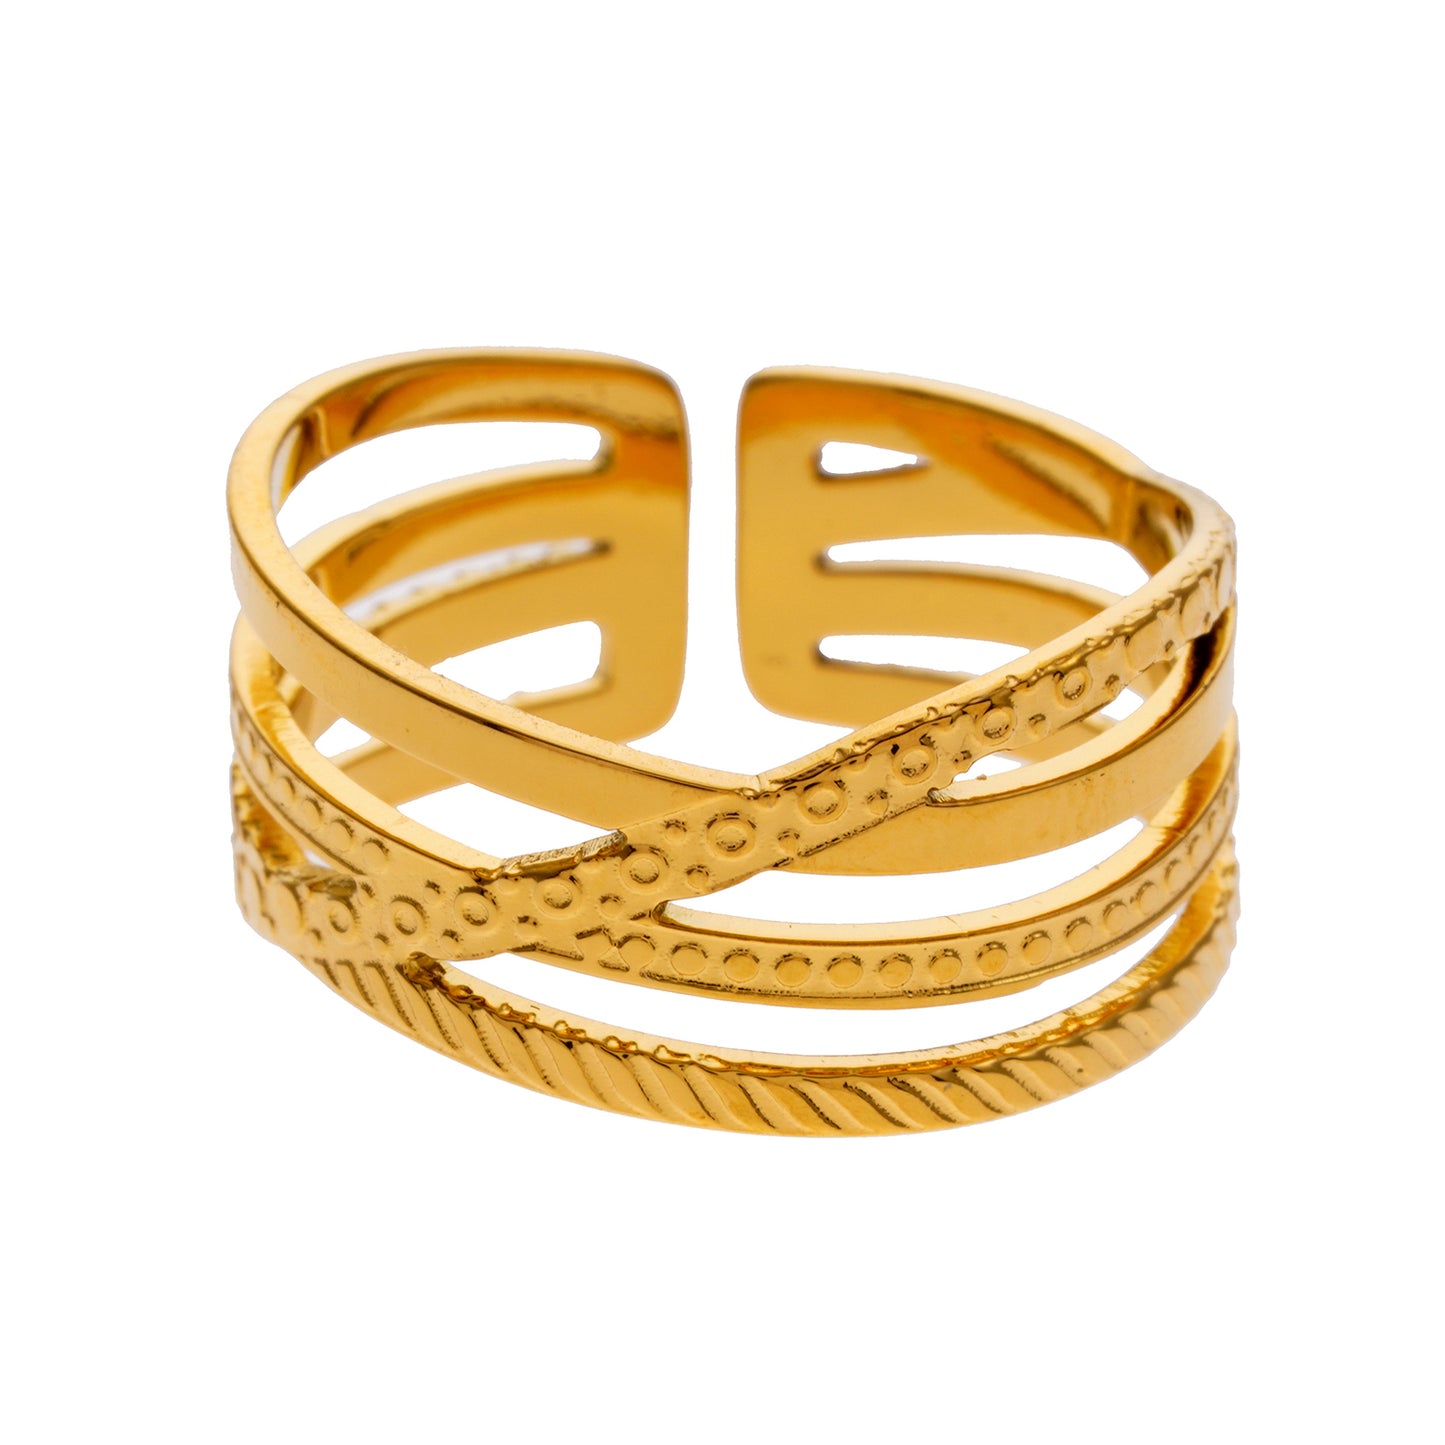 Style ALOIS 7793: Cross Over Multi Stacked Textured Gold Ring.